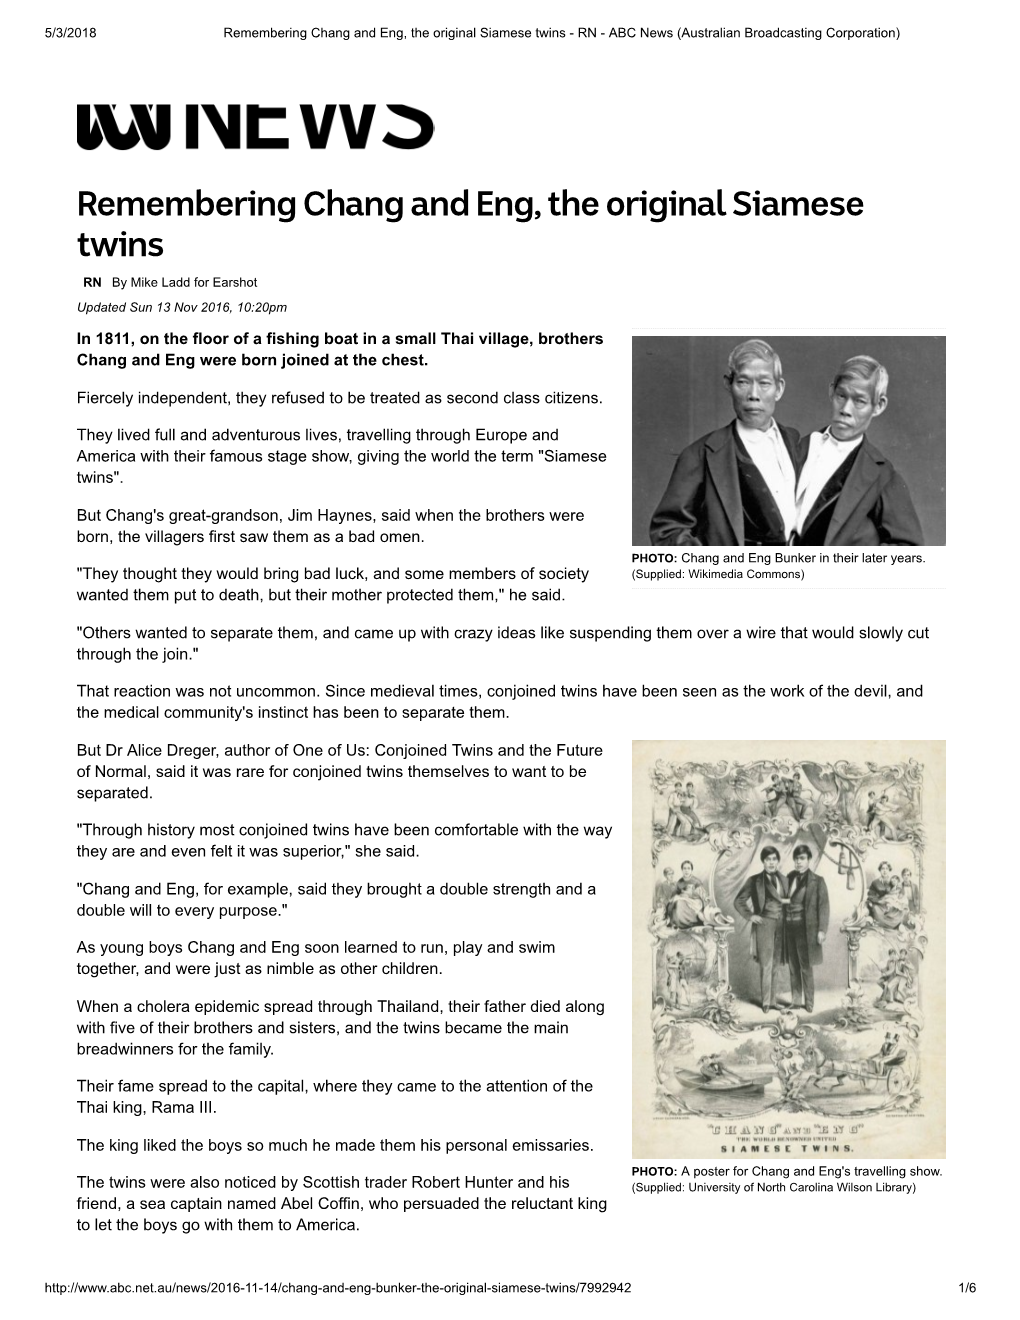 Remembering Chang and Eng, the Original Siamese Twins – RN